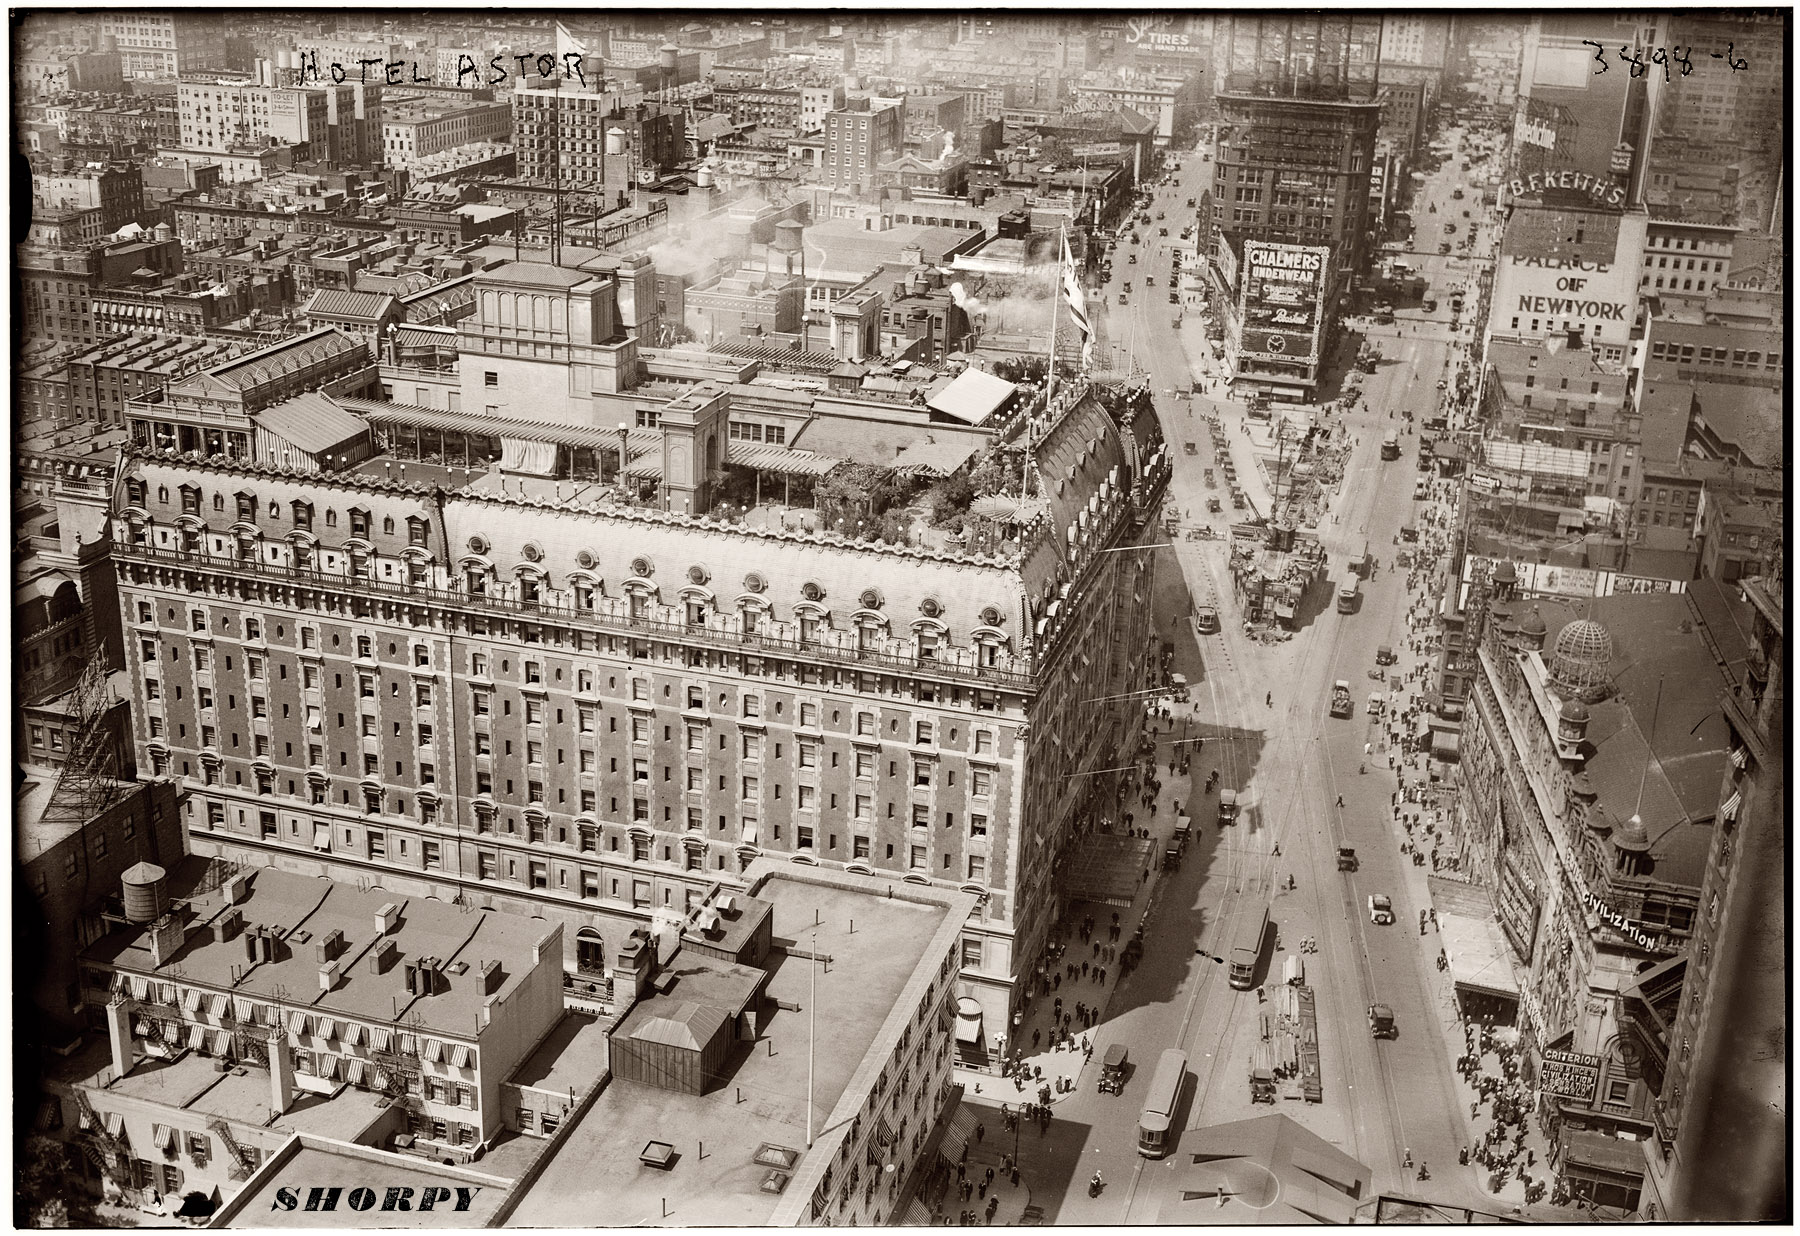 The Hotel Astor on Times Square circa 1916. Note roof garden and, at lower right, the elaborate marquee for the film "Civilization." View full size. (George Grantham Bain Collection.) The building, at 1515 Broadway and West 44th Street, was demolished in 1967 and replaced by, in the words of one architecture critic, a "hideous tall office tower," 1 Astor Plaza, whose crownlike top is a familiar sight from across the Hudson River in New Jersey.